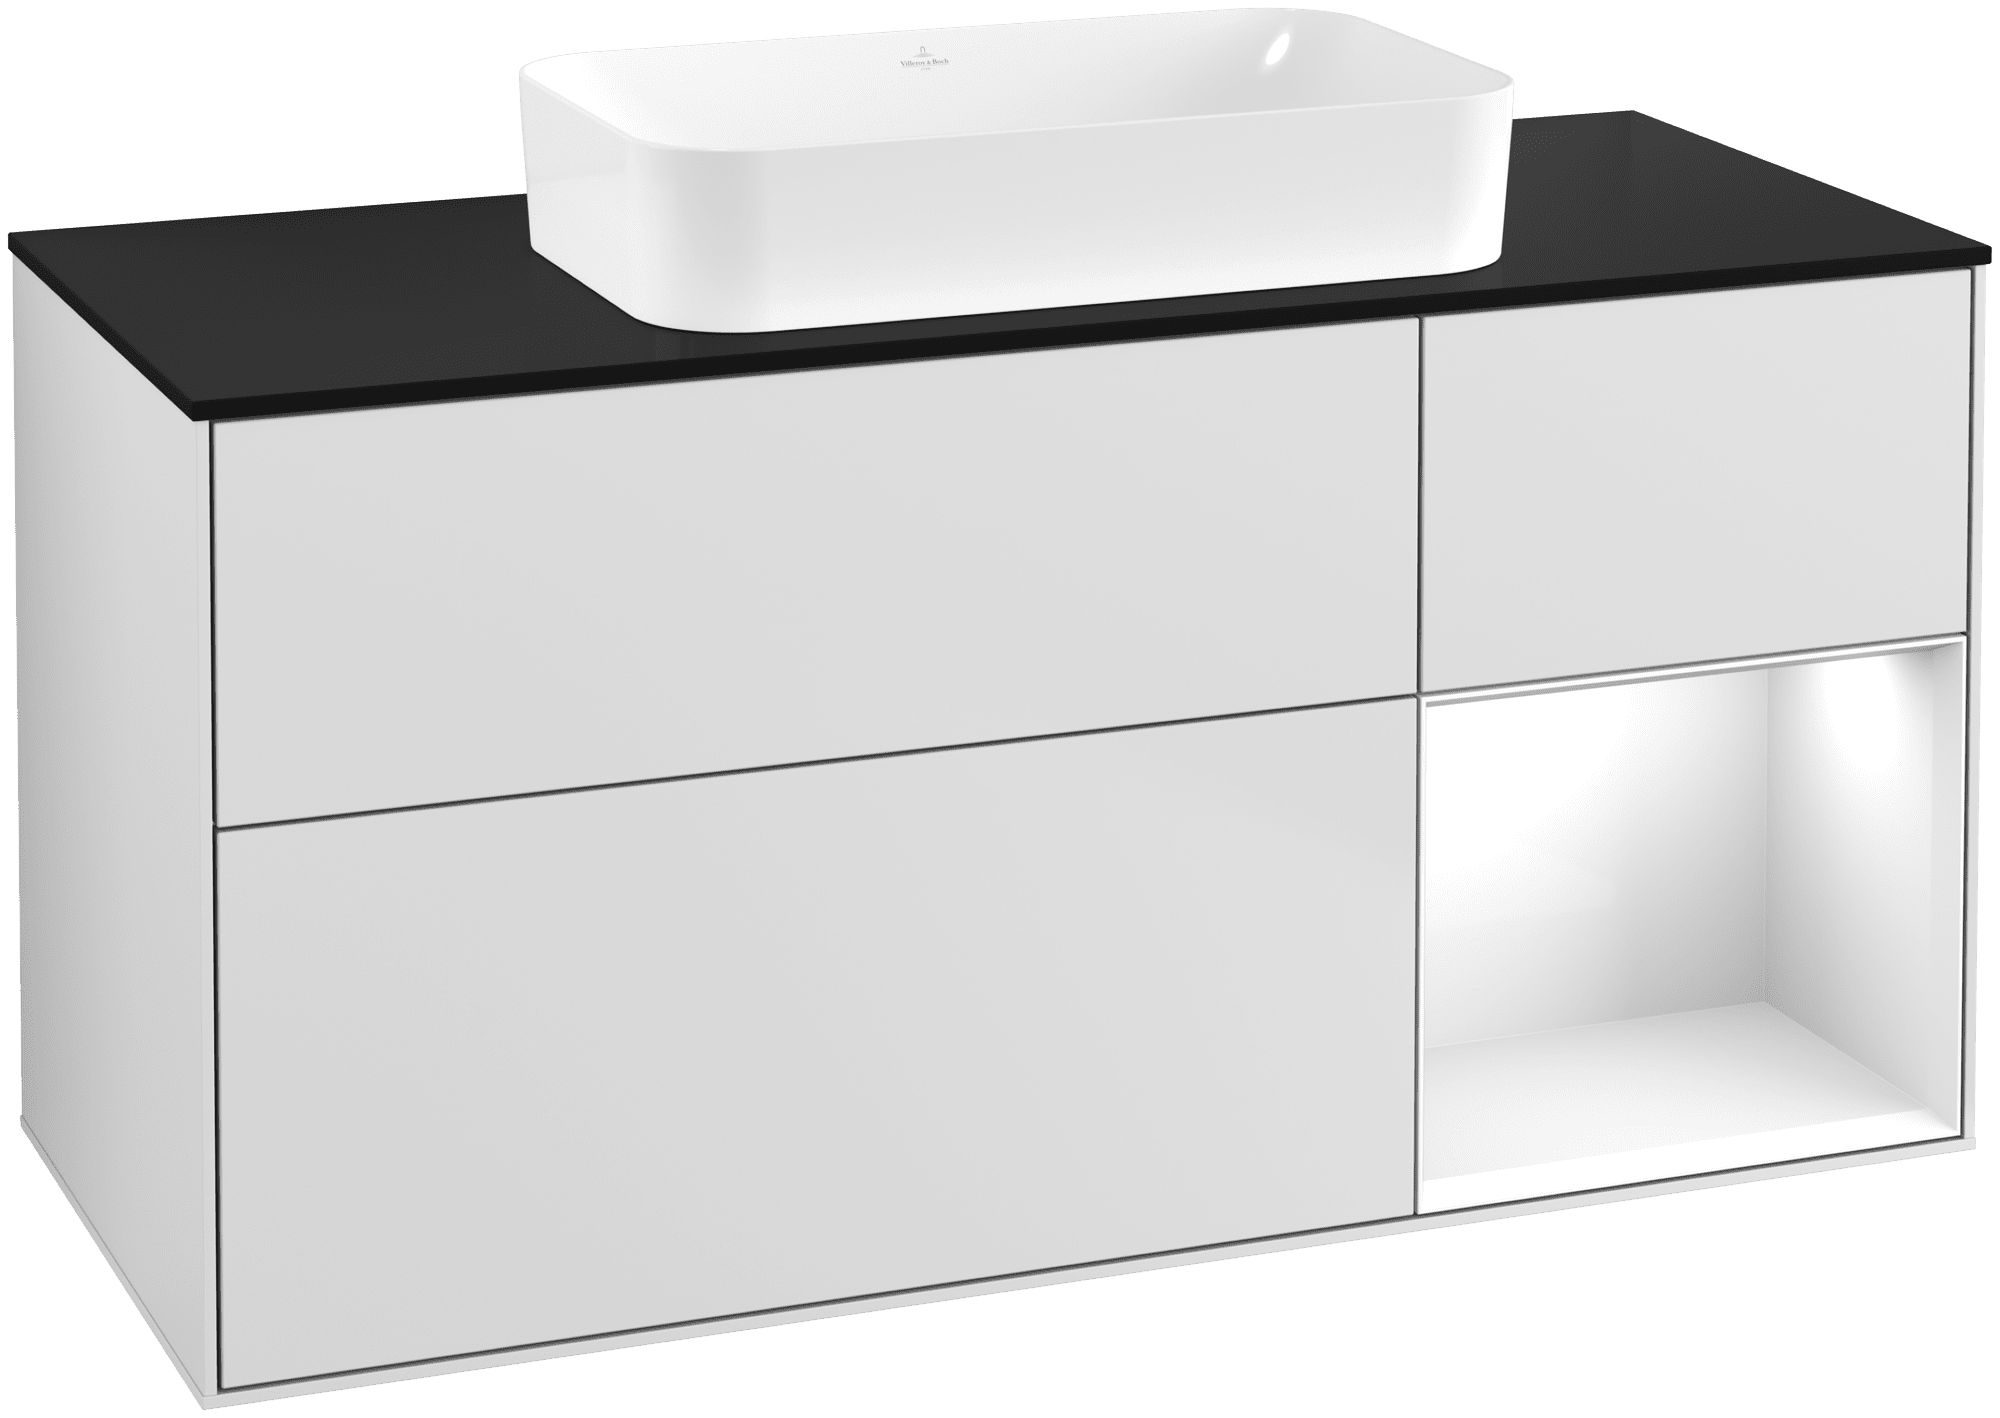 VILLEROY BOCH Finion Vanity unit, with lighting, 3 pull-out compartments, 1200 x 603 x 501 mm, White Matt Lacquer / Glossy White Lacquer / Glass Black Matt #G712GFMT resmi